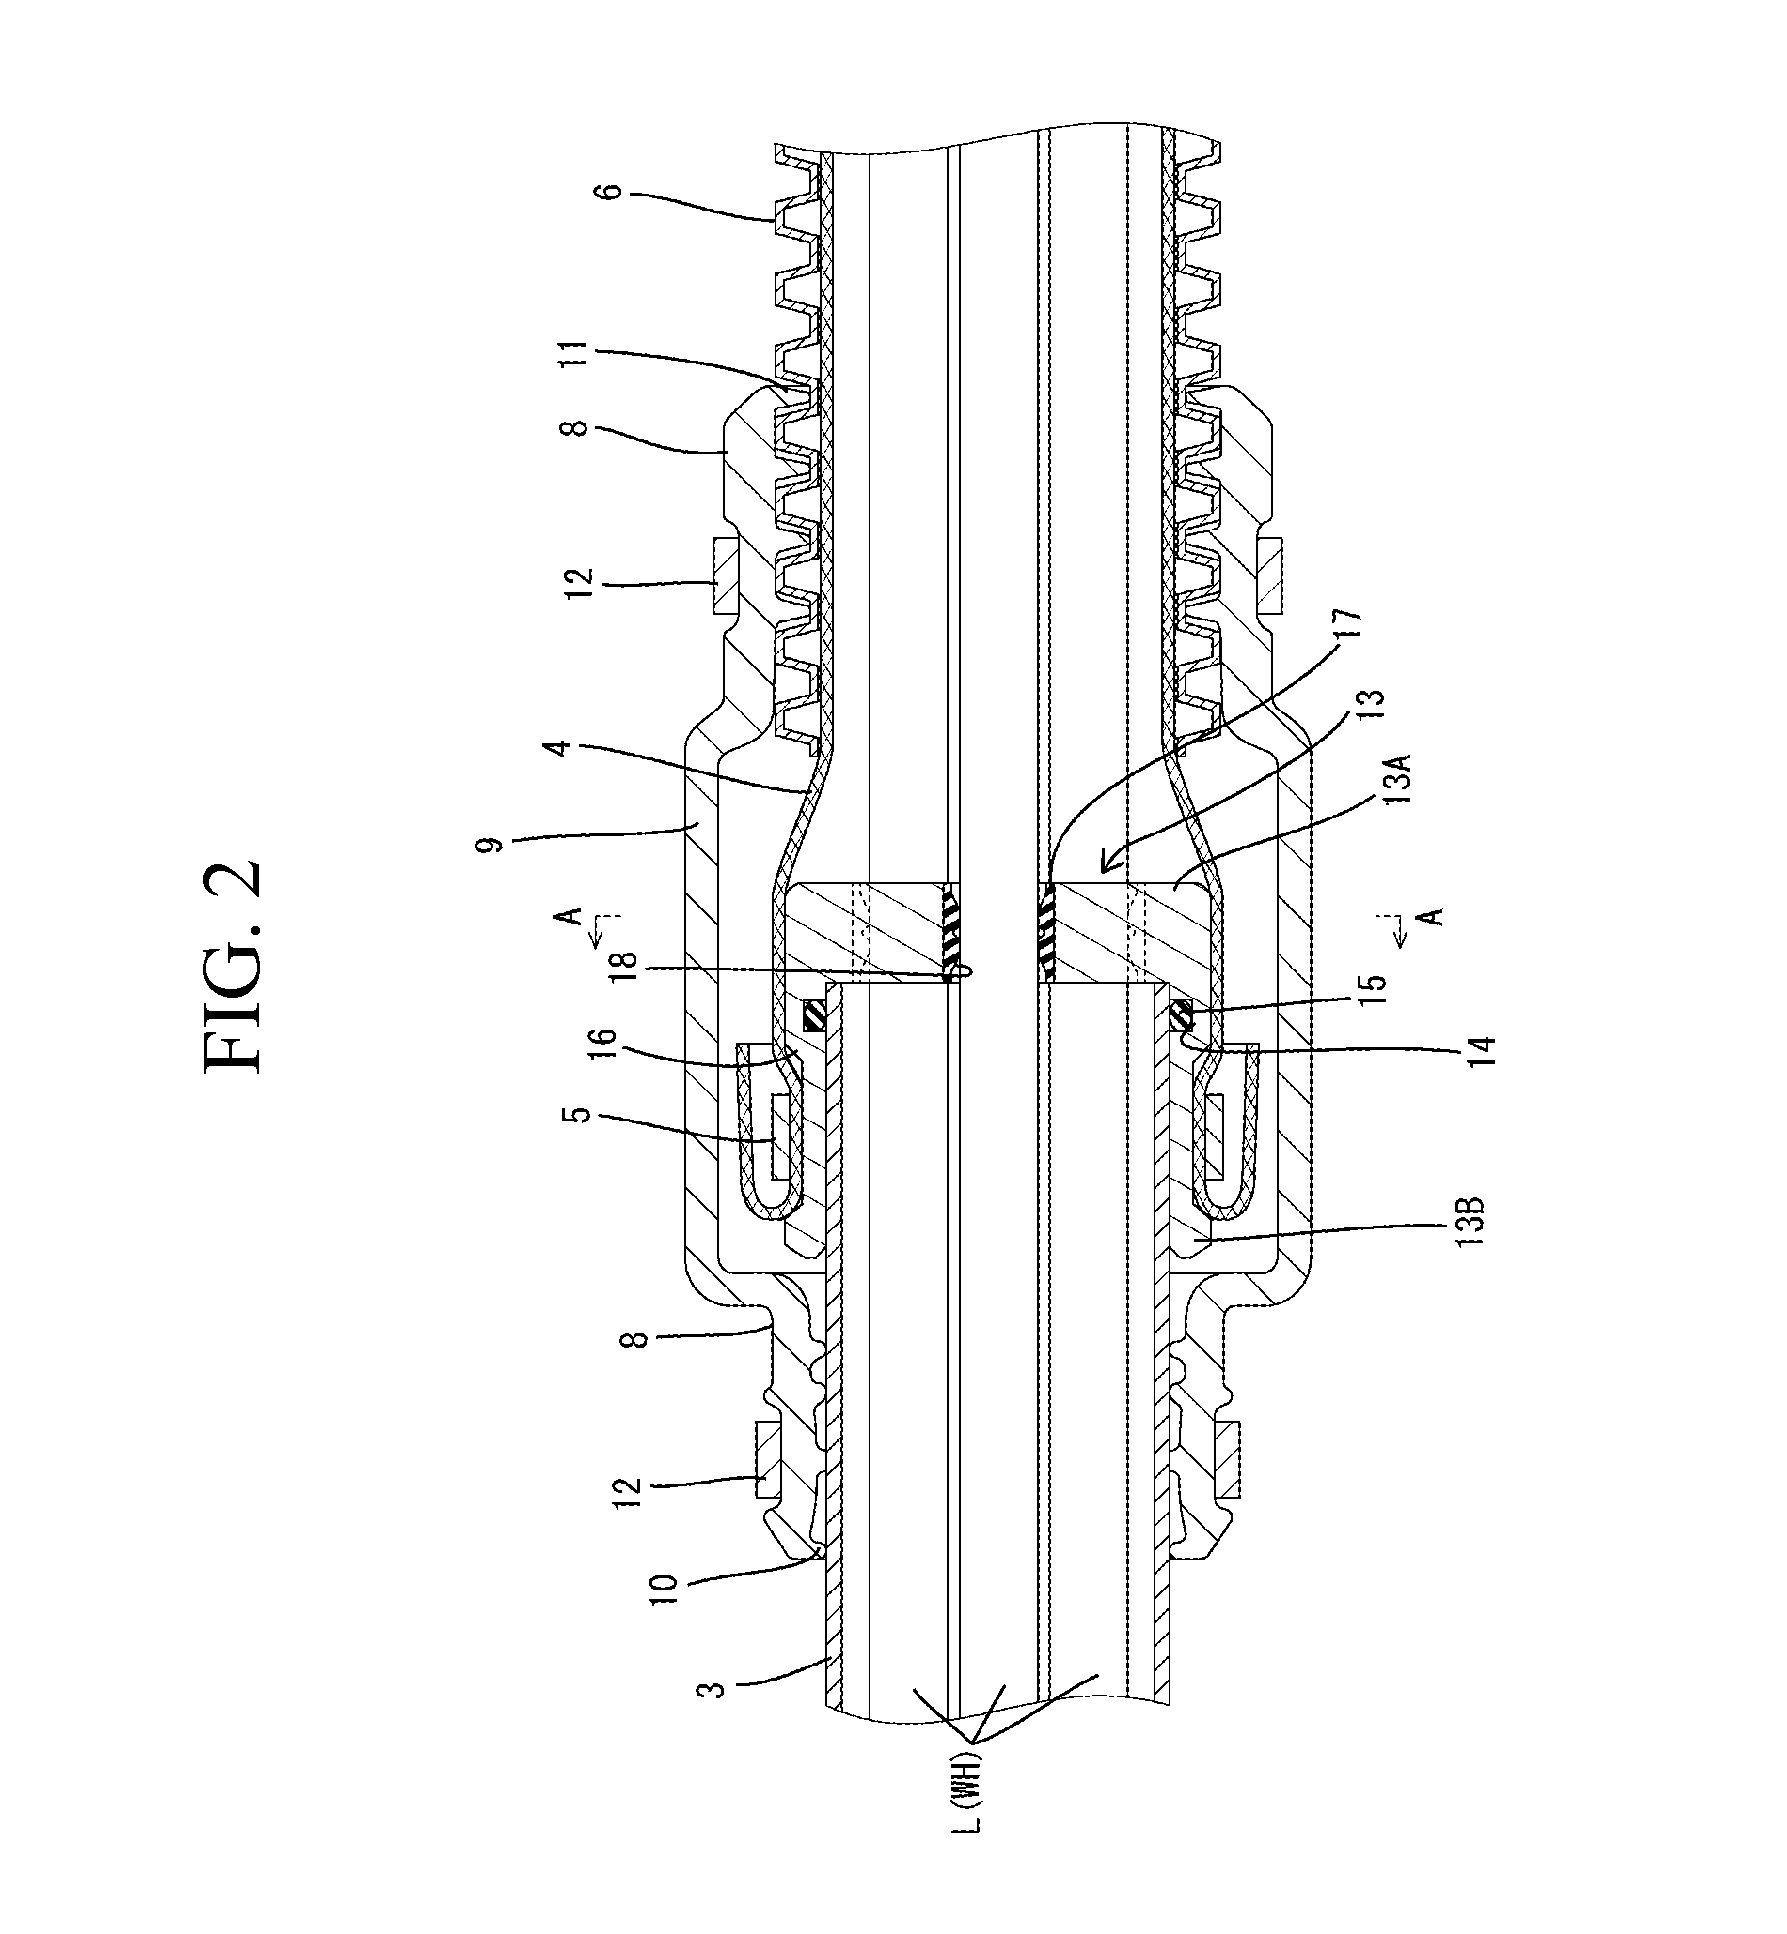 Shield structure for wire harness